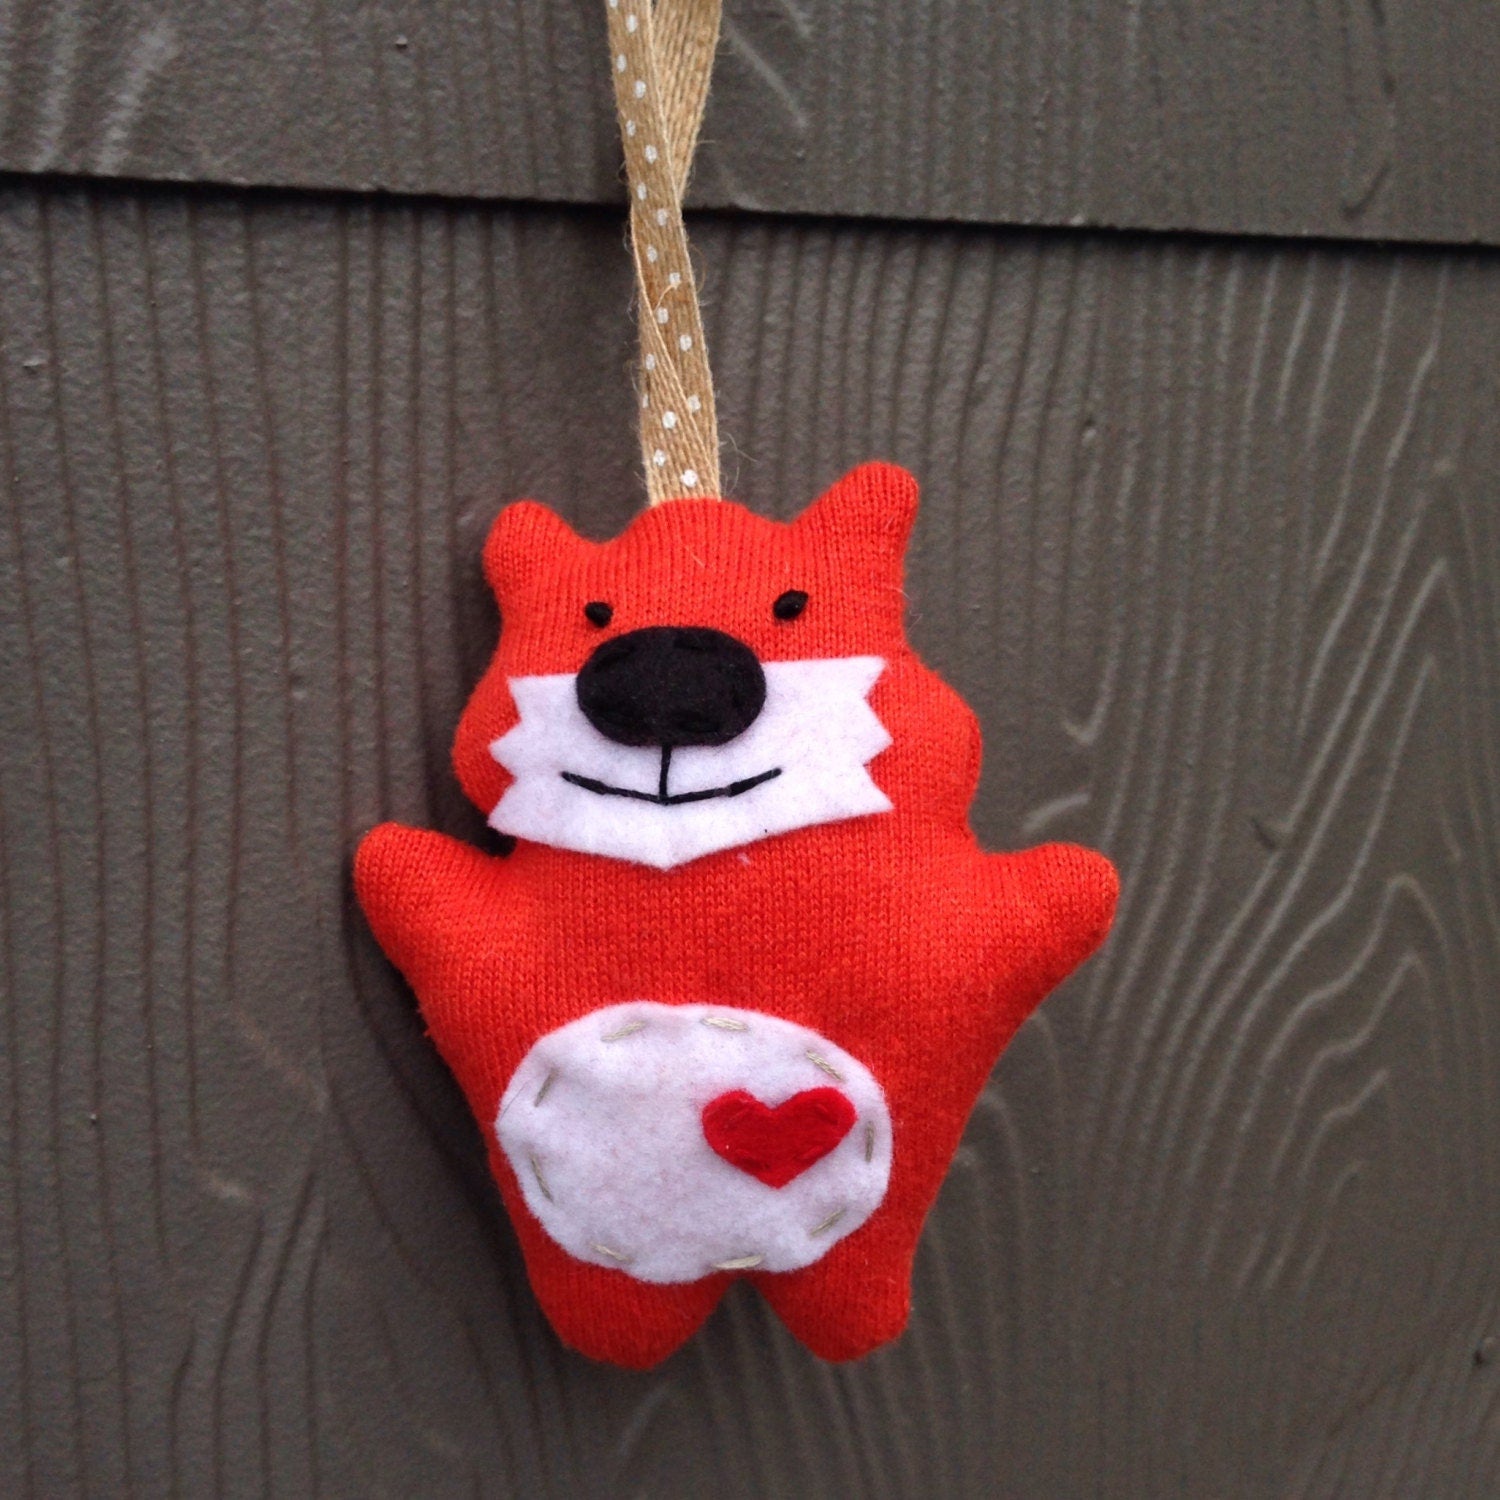 Little Fox ornament from recycled materials